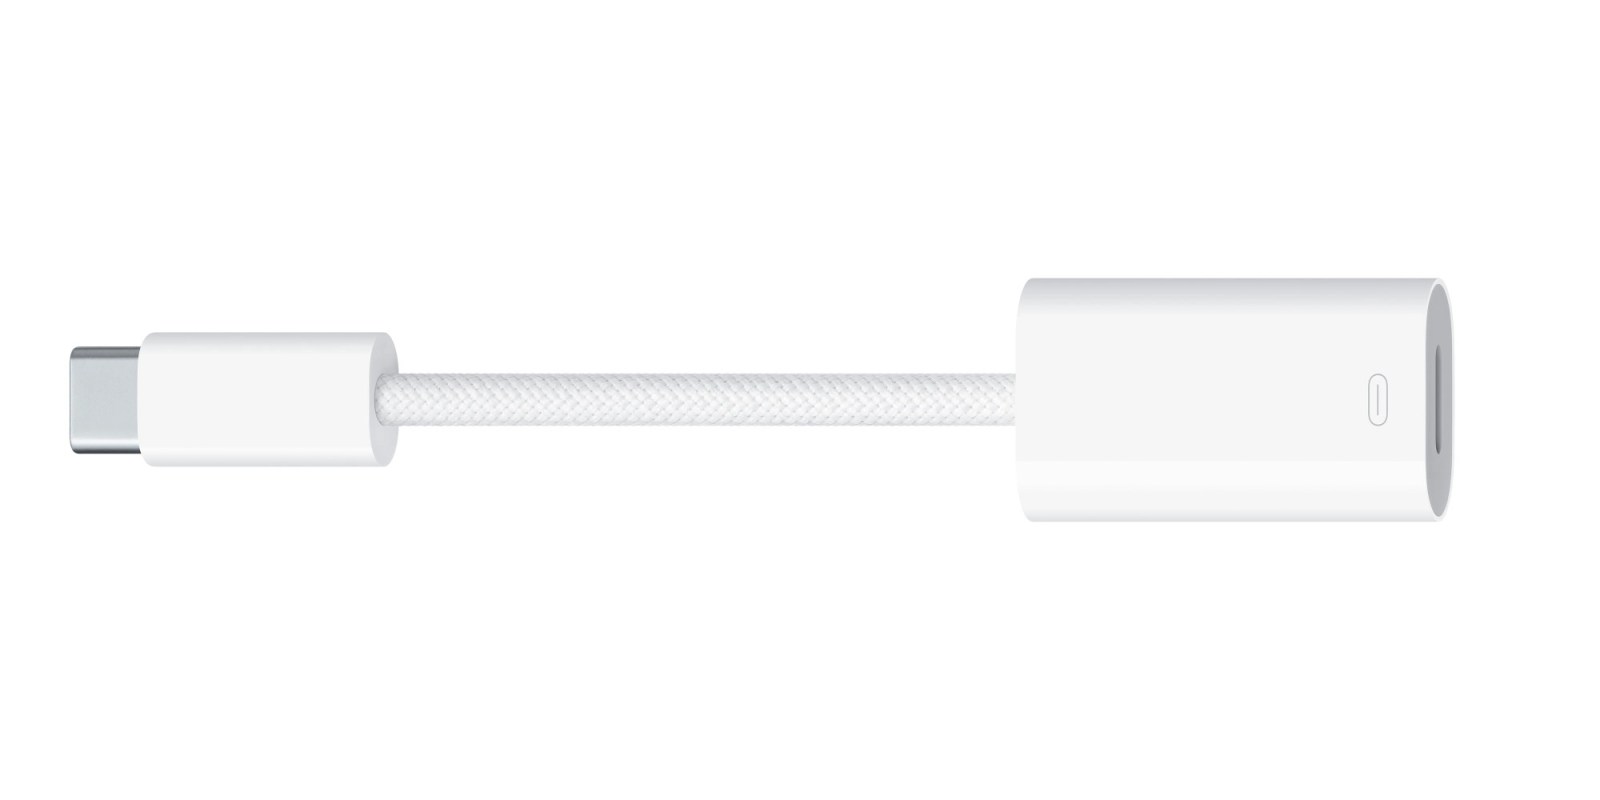 Apple's new Lightning to USB-C adapter is hilariously expensive